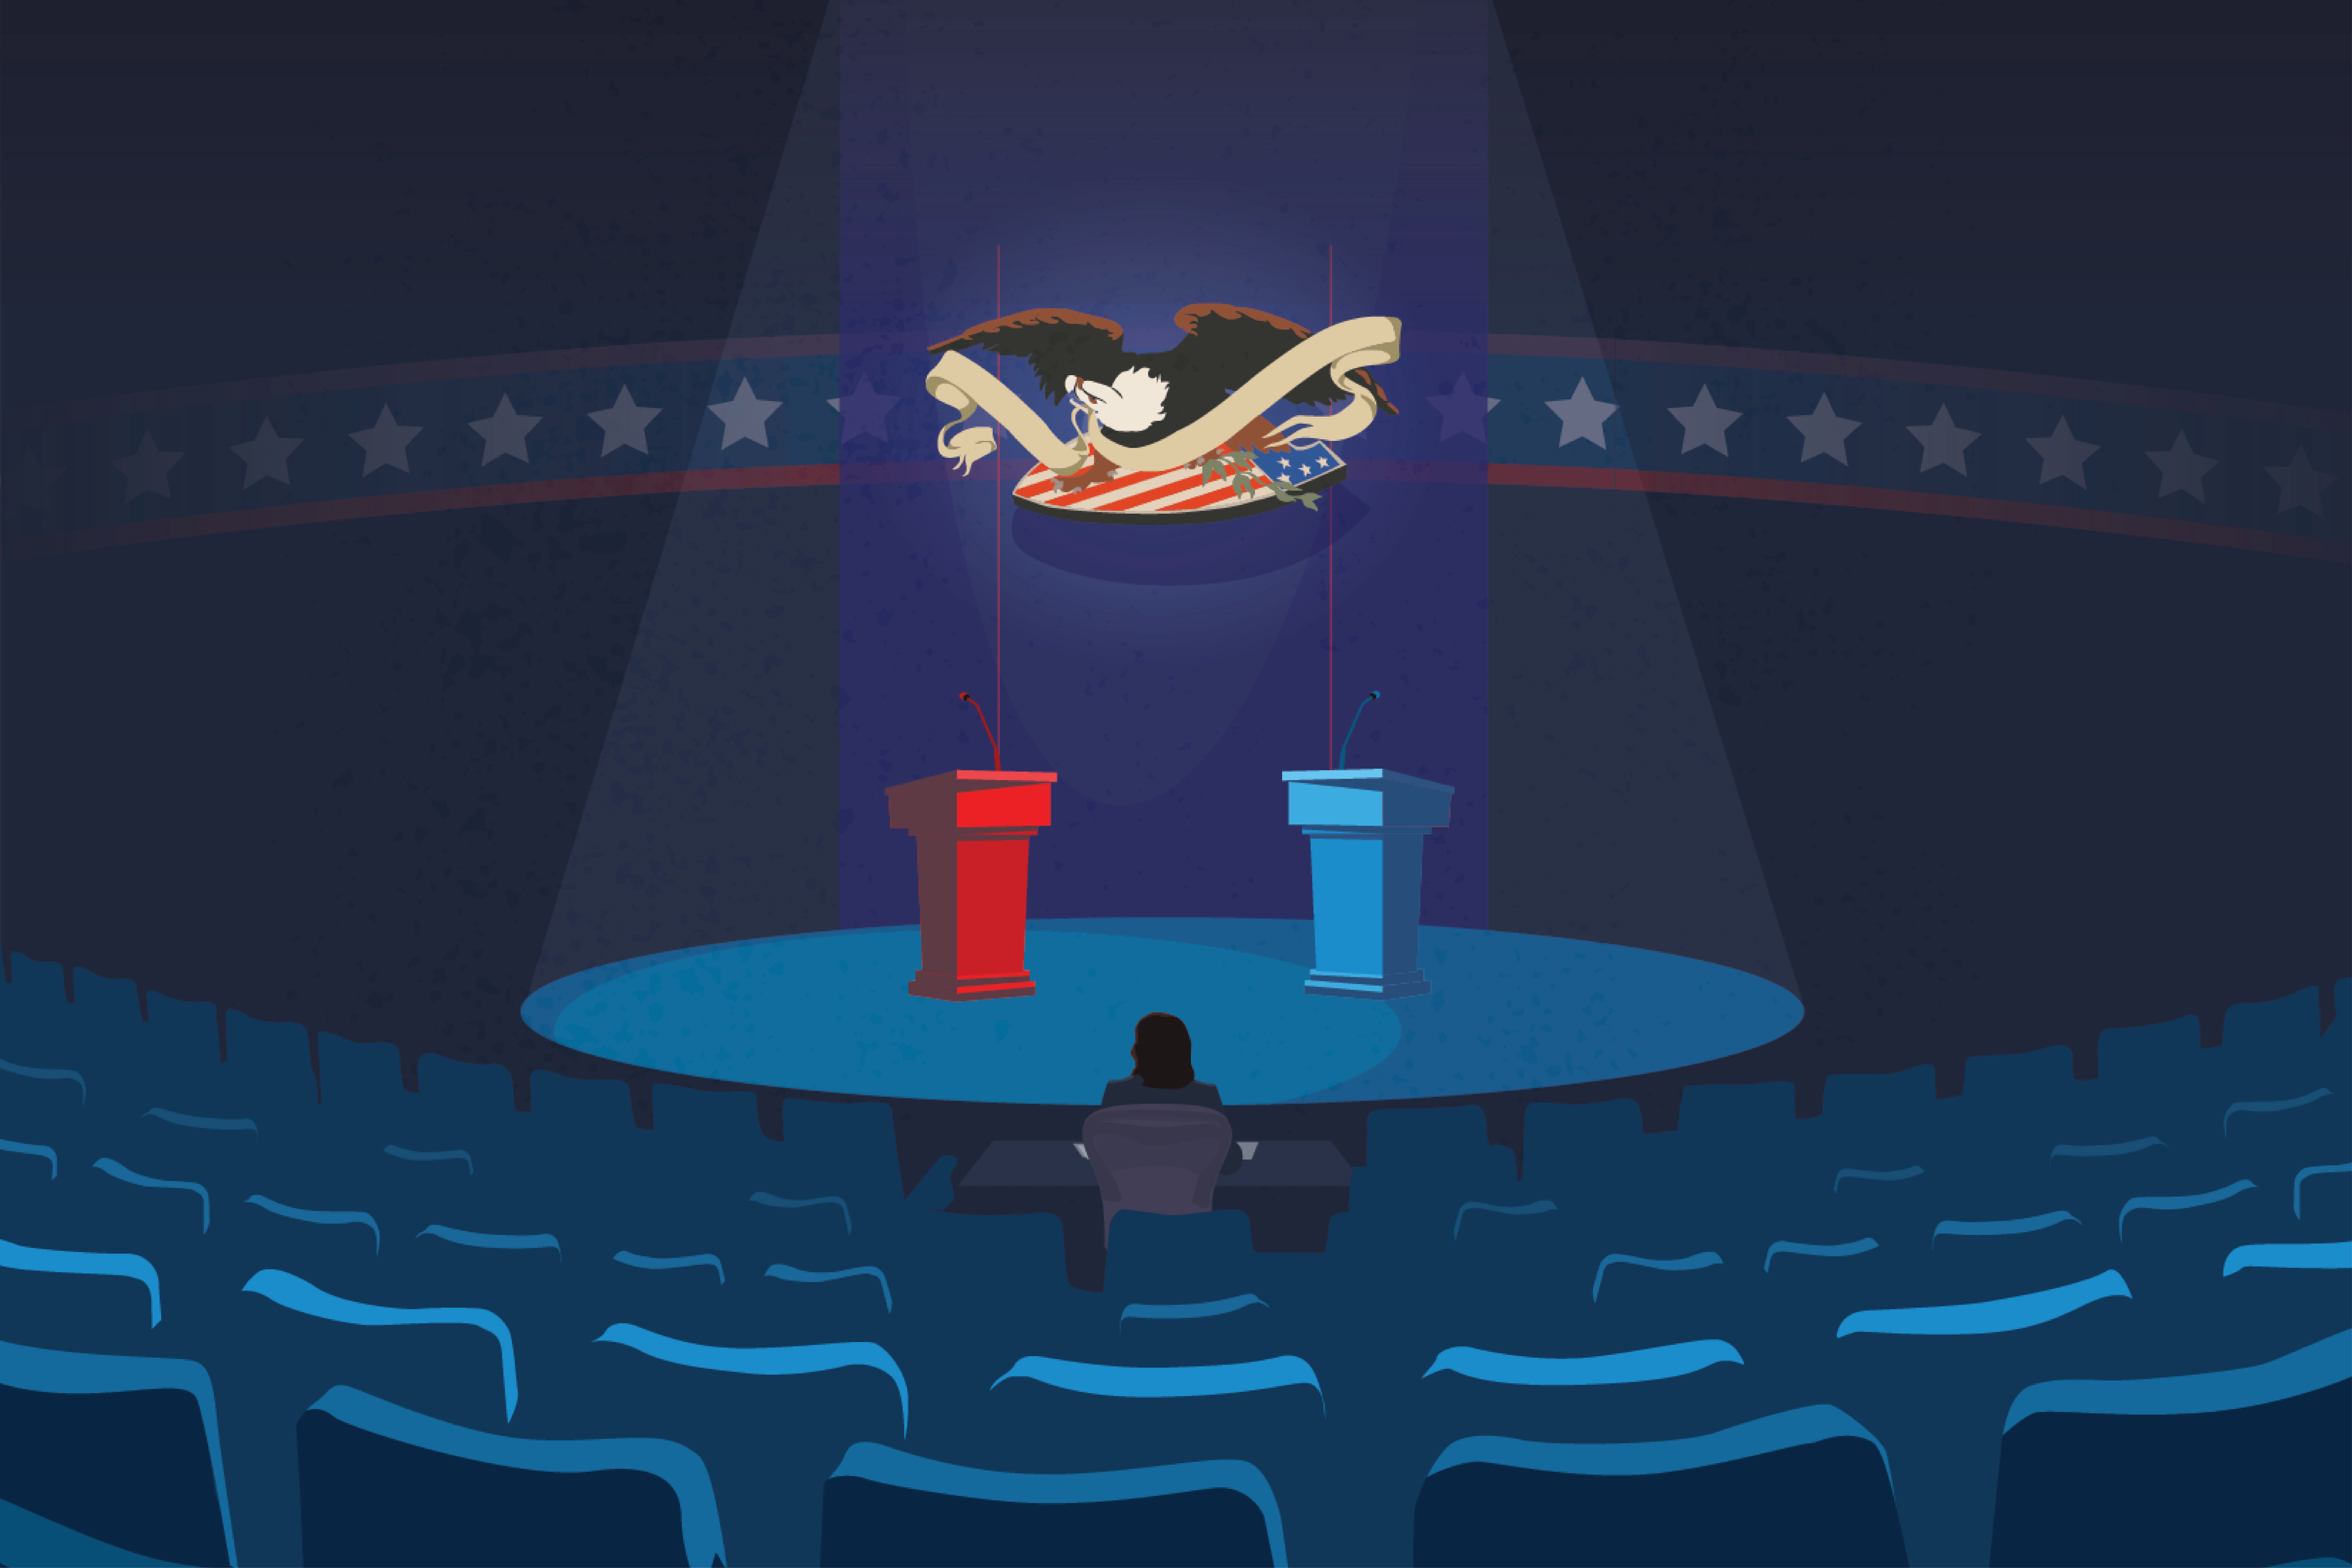 An empty debate stage featuring red and blue podiums below a stage light face an audience of nearly-empty seats.